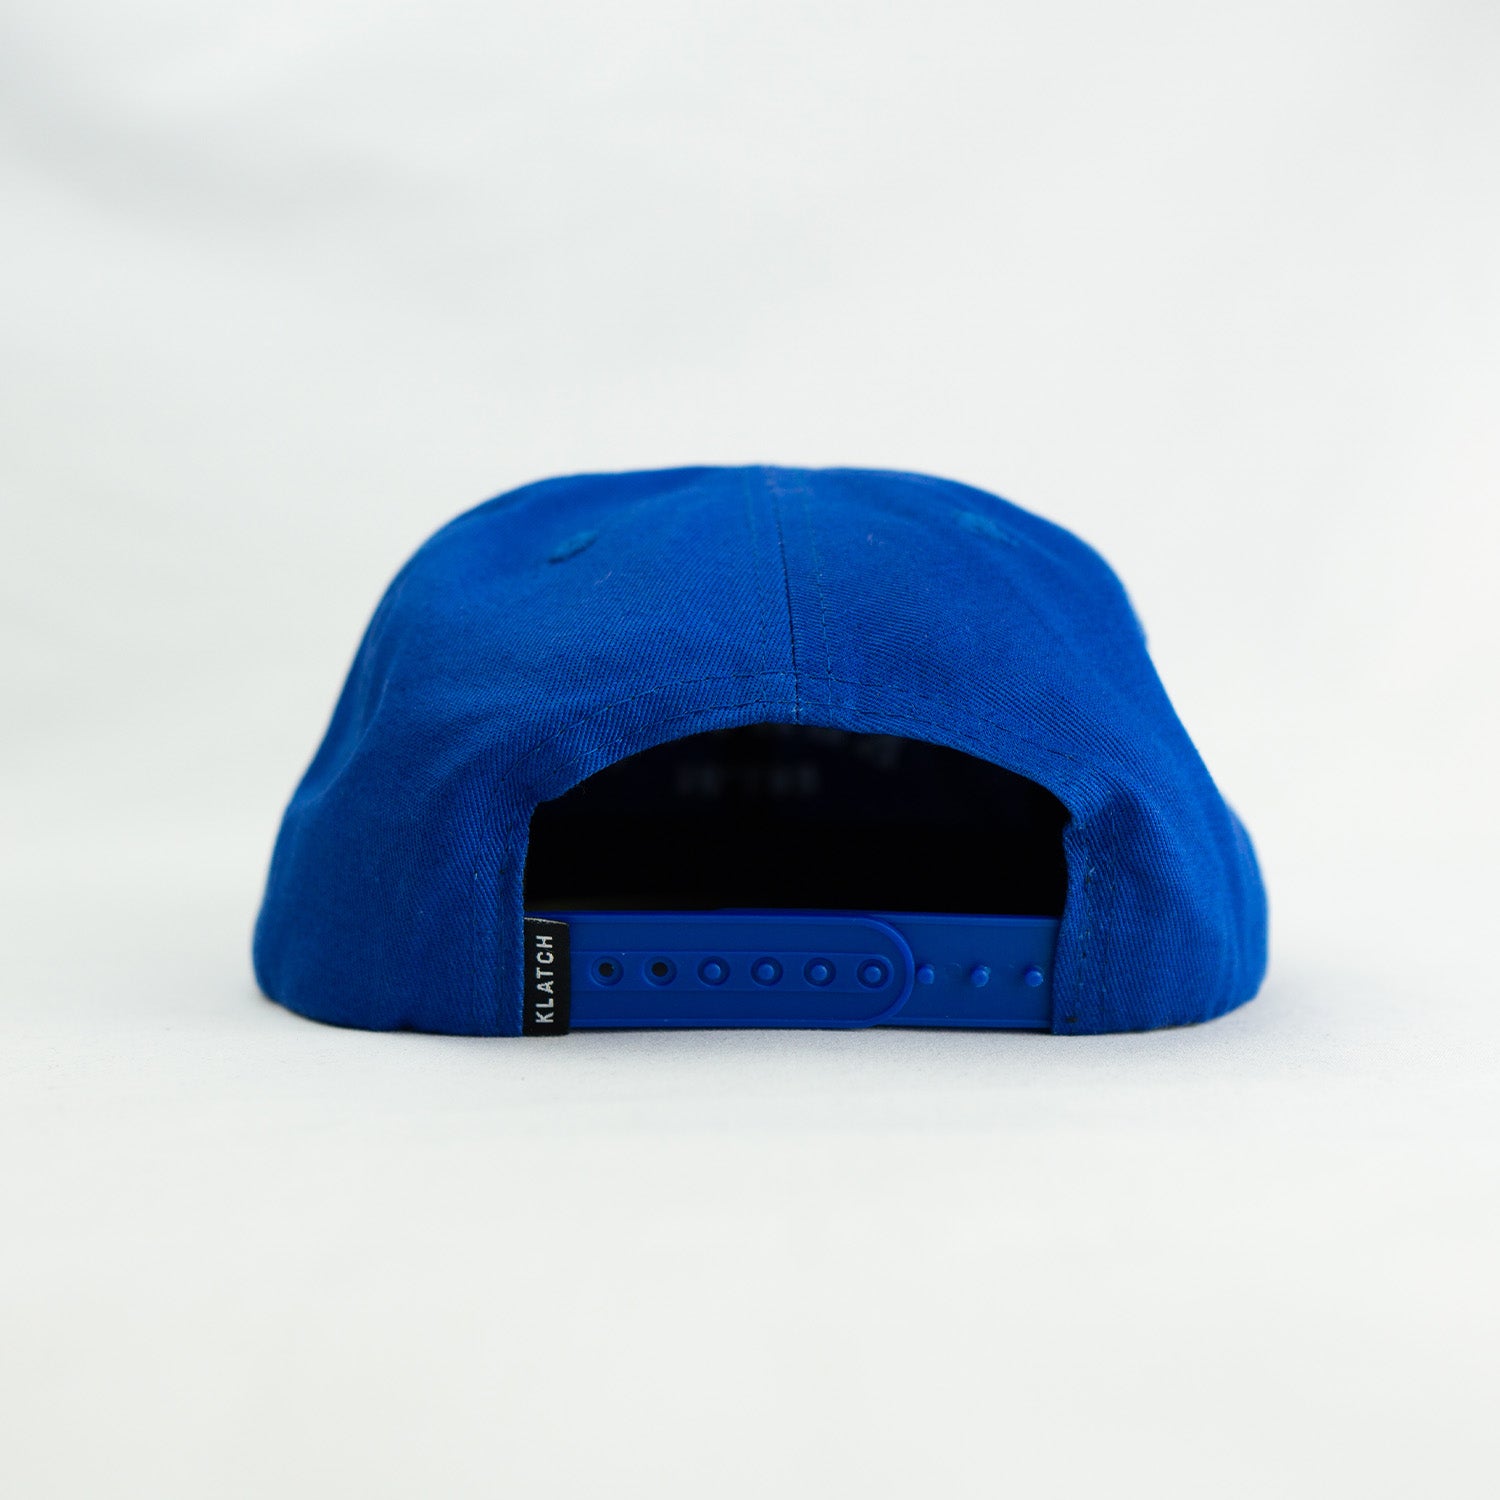 klatch co campbell snapback cap in navy and white back view